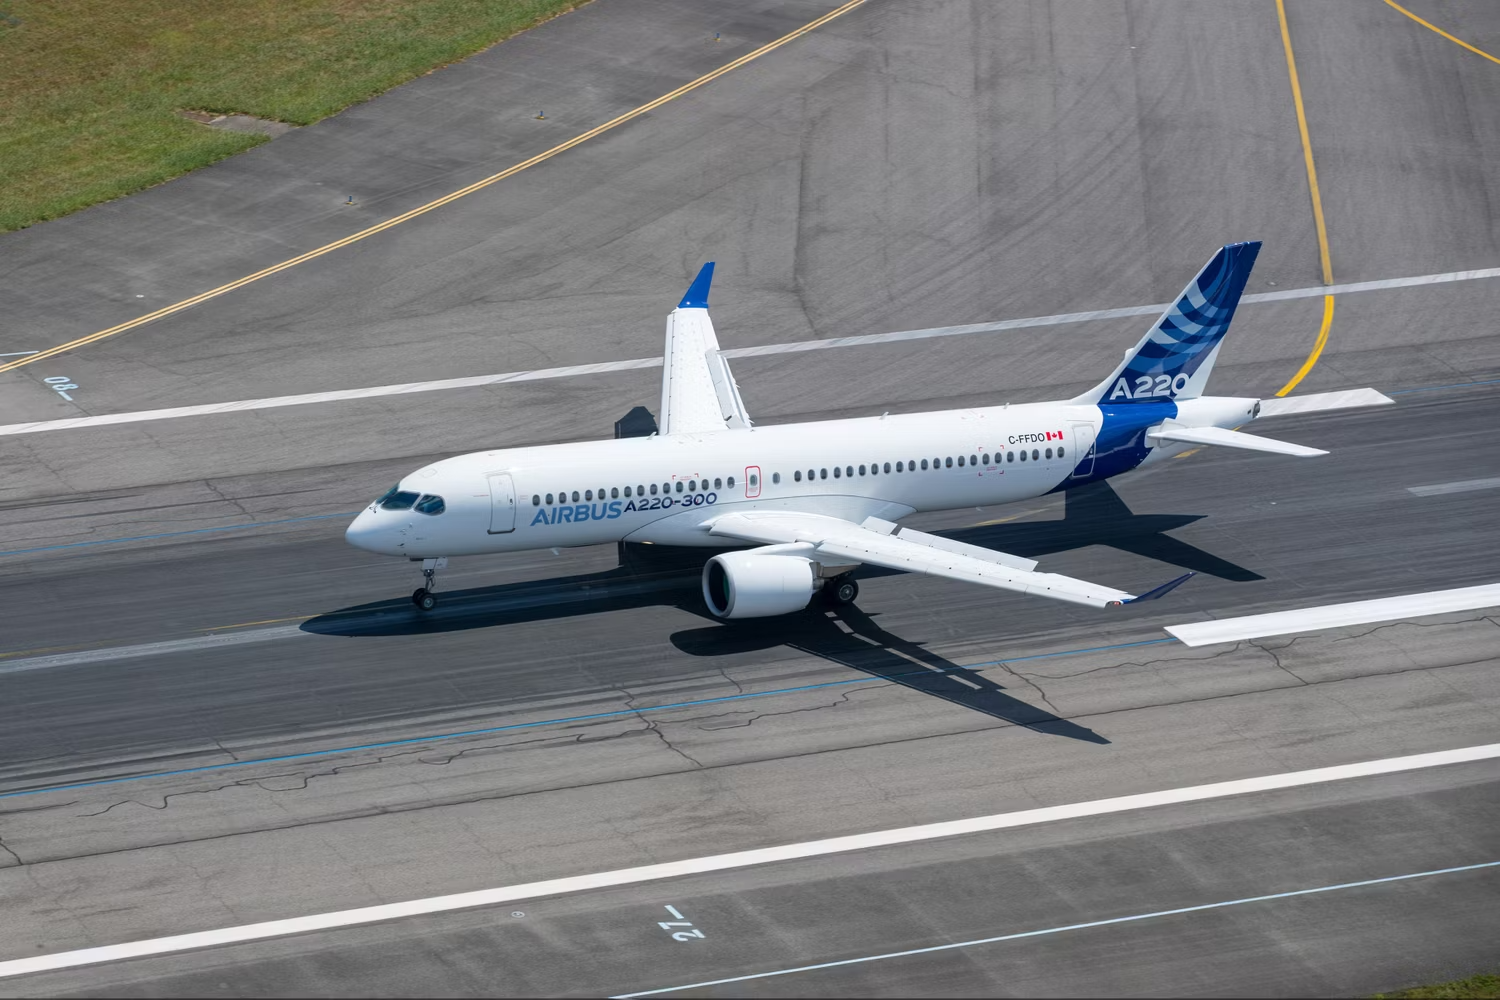 The A220 delivery with new Airbus livery